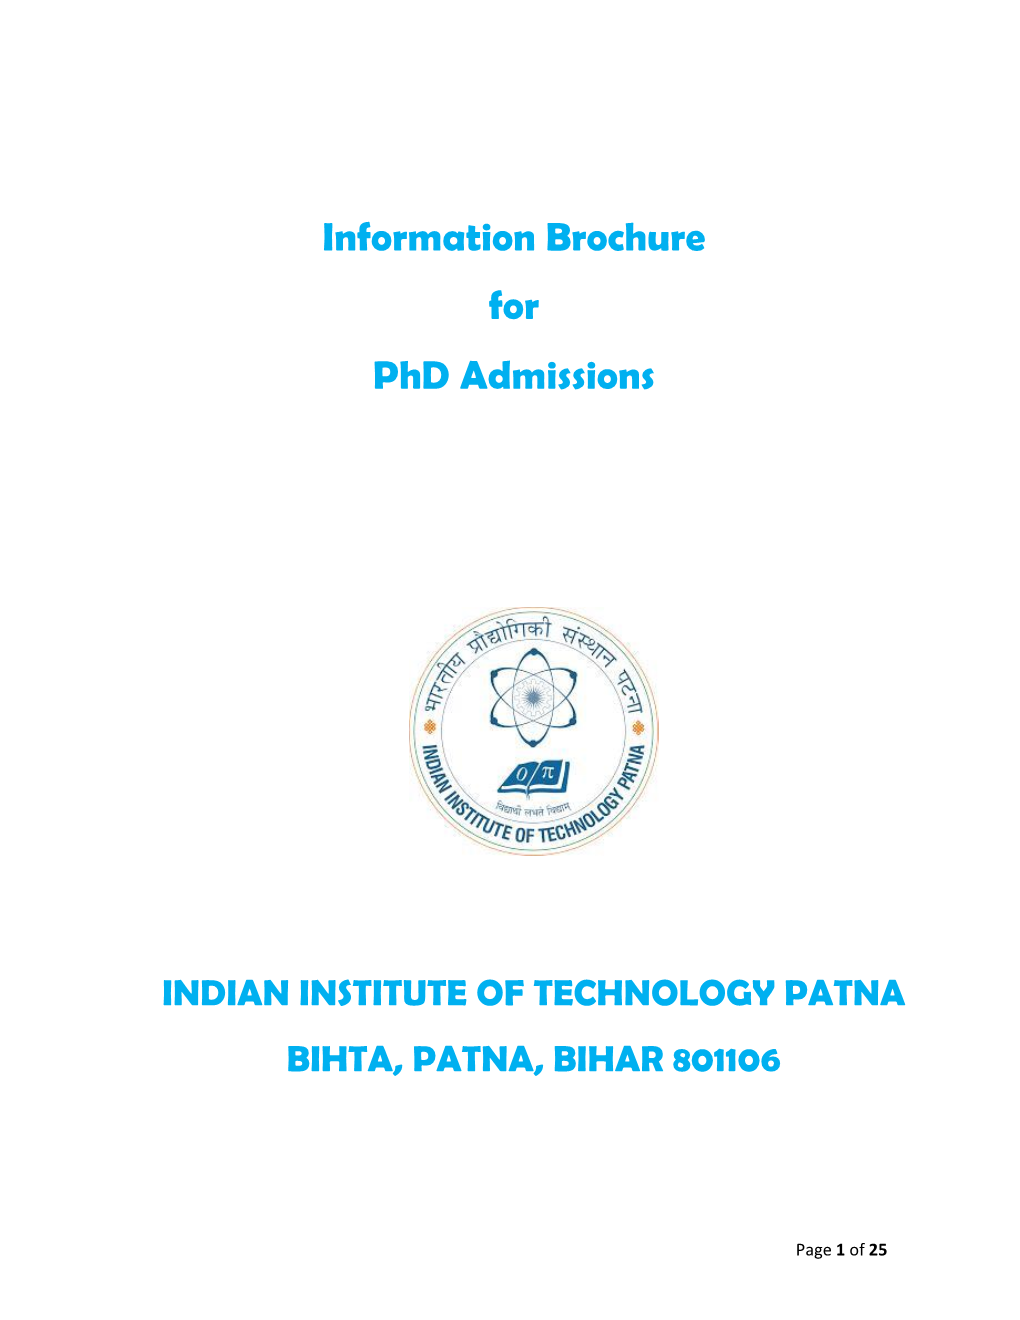 Information Brochure for Phd Admissions